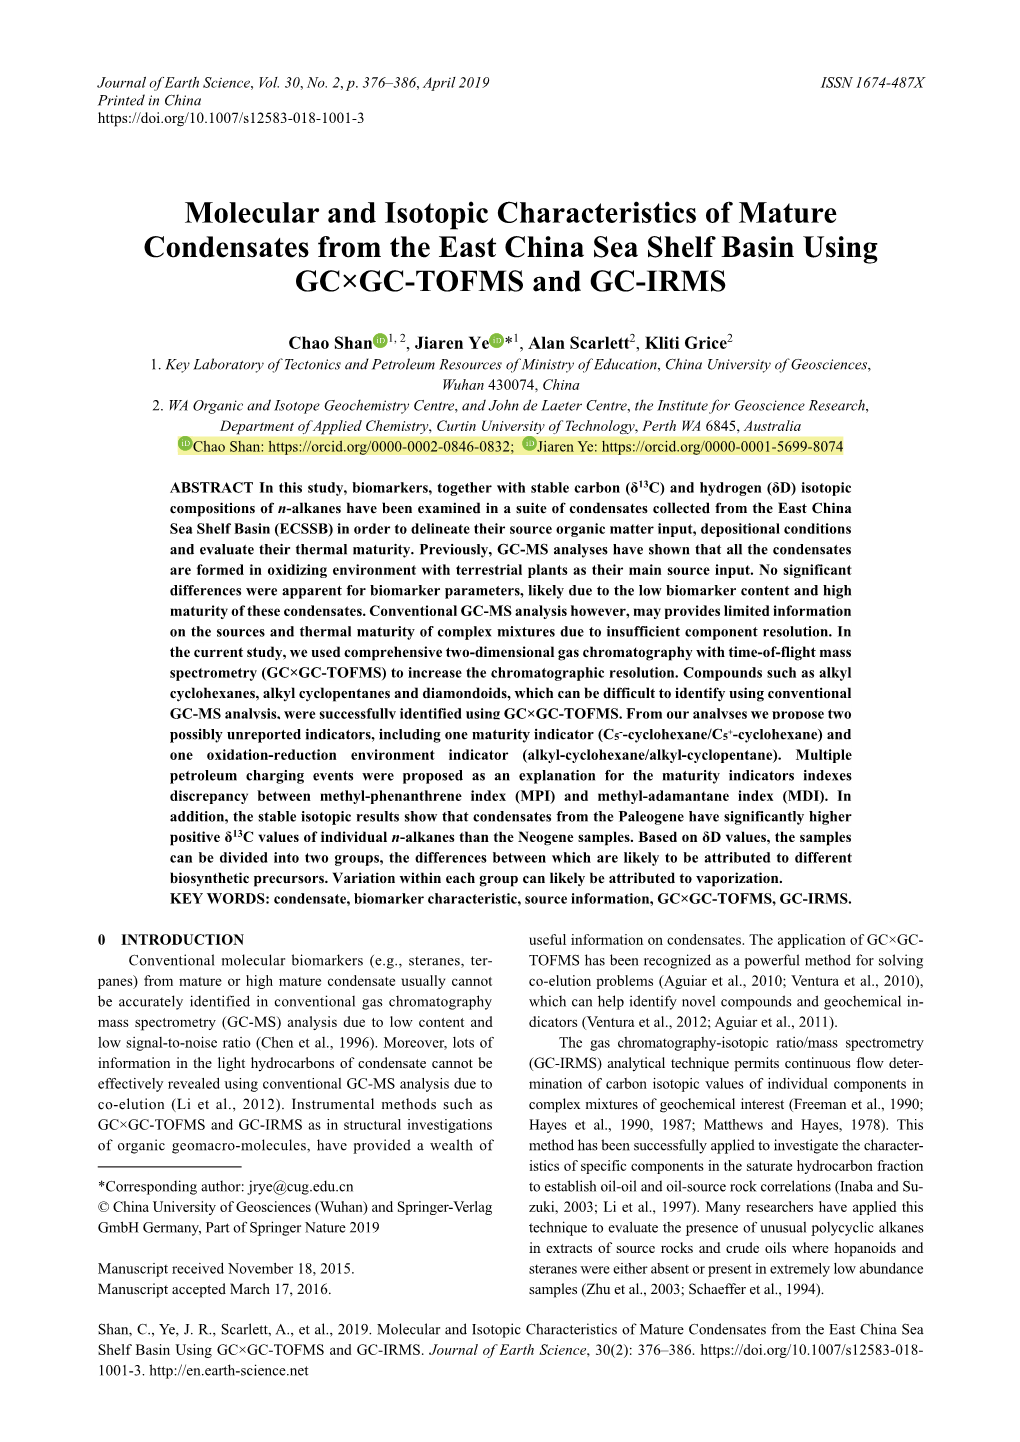 Molecular and Isotopic Characteristics of Mature Condensates from the East China Sea Shelf Basin Using GC×GC-TOFMS and GC-IRMS